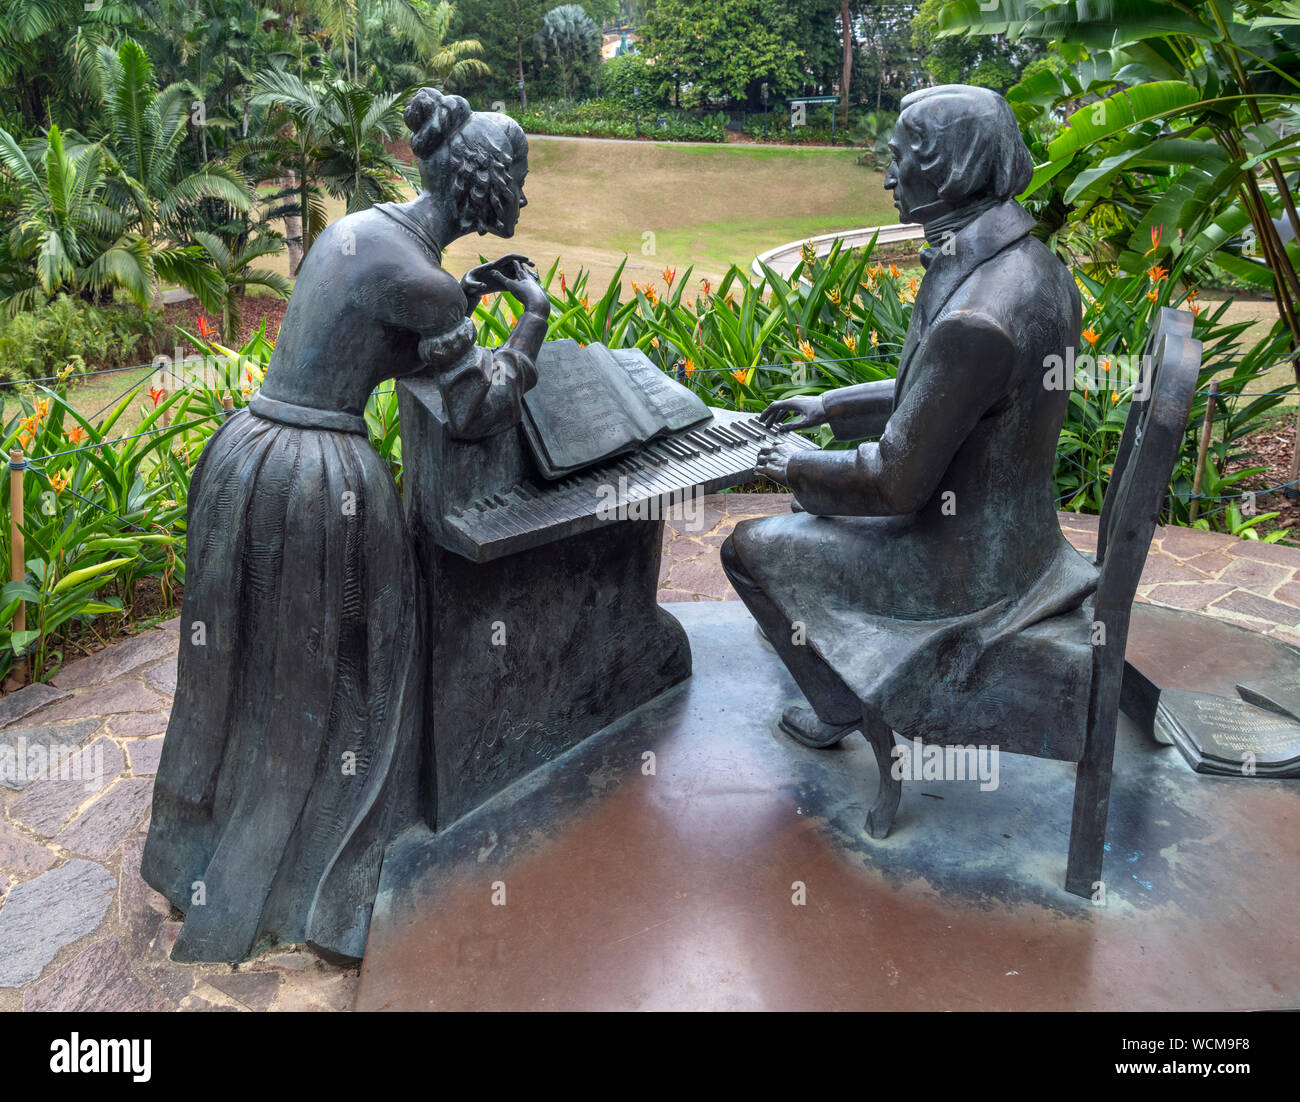 Karol Badyna's sculpture 'Choping Overlooking the Symphony Stage' in Singapore Botanic Gardens, Singapore Stock Photo